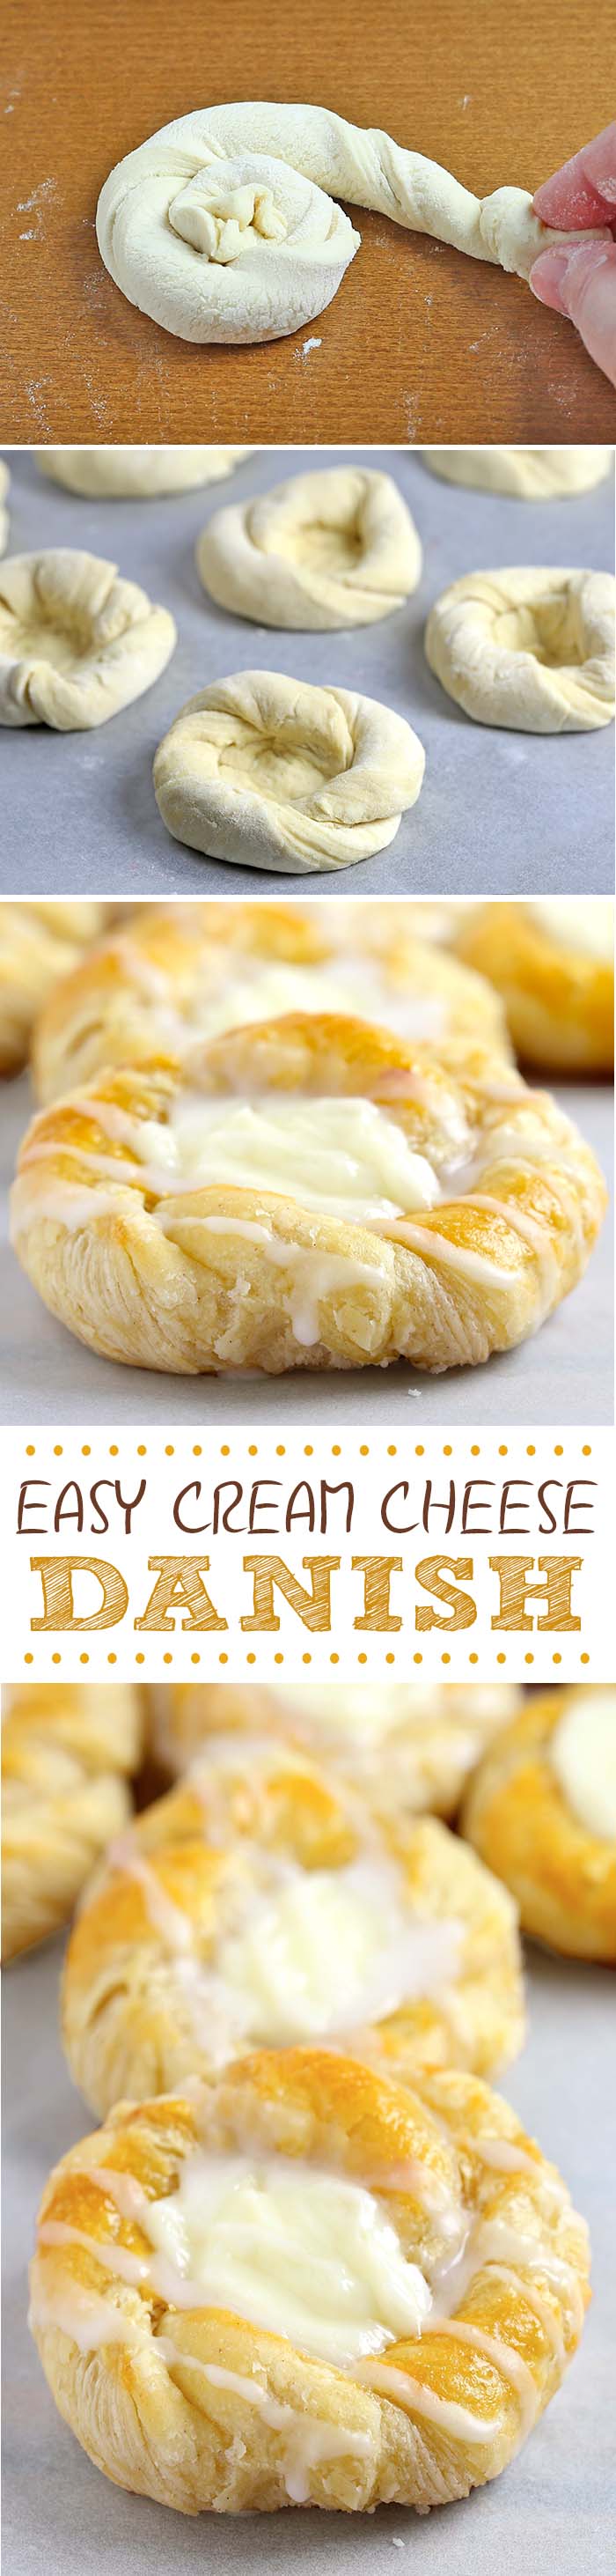 This quick and easy cream cheese danish starts with store-bought crescent roll dough, and can be made, start to finish in under 30 minutes. 